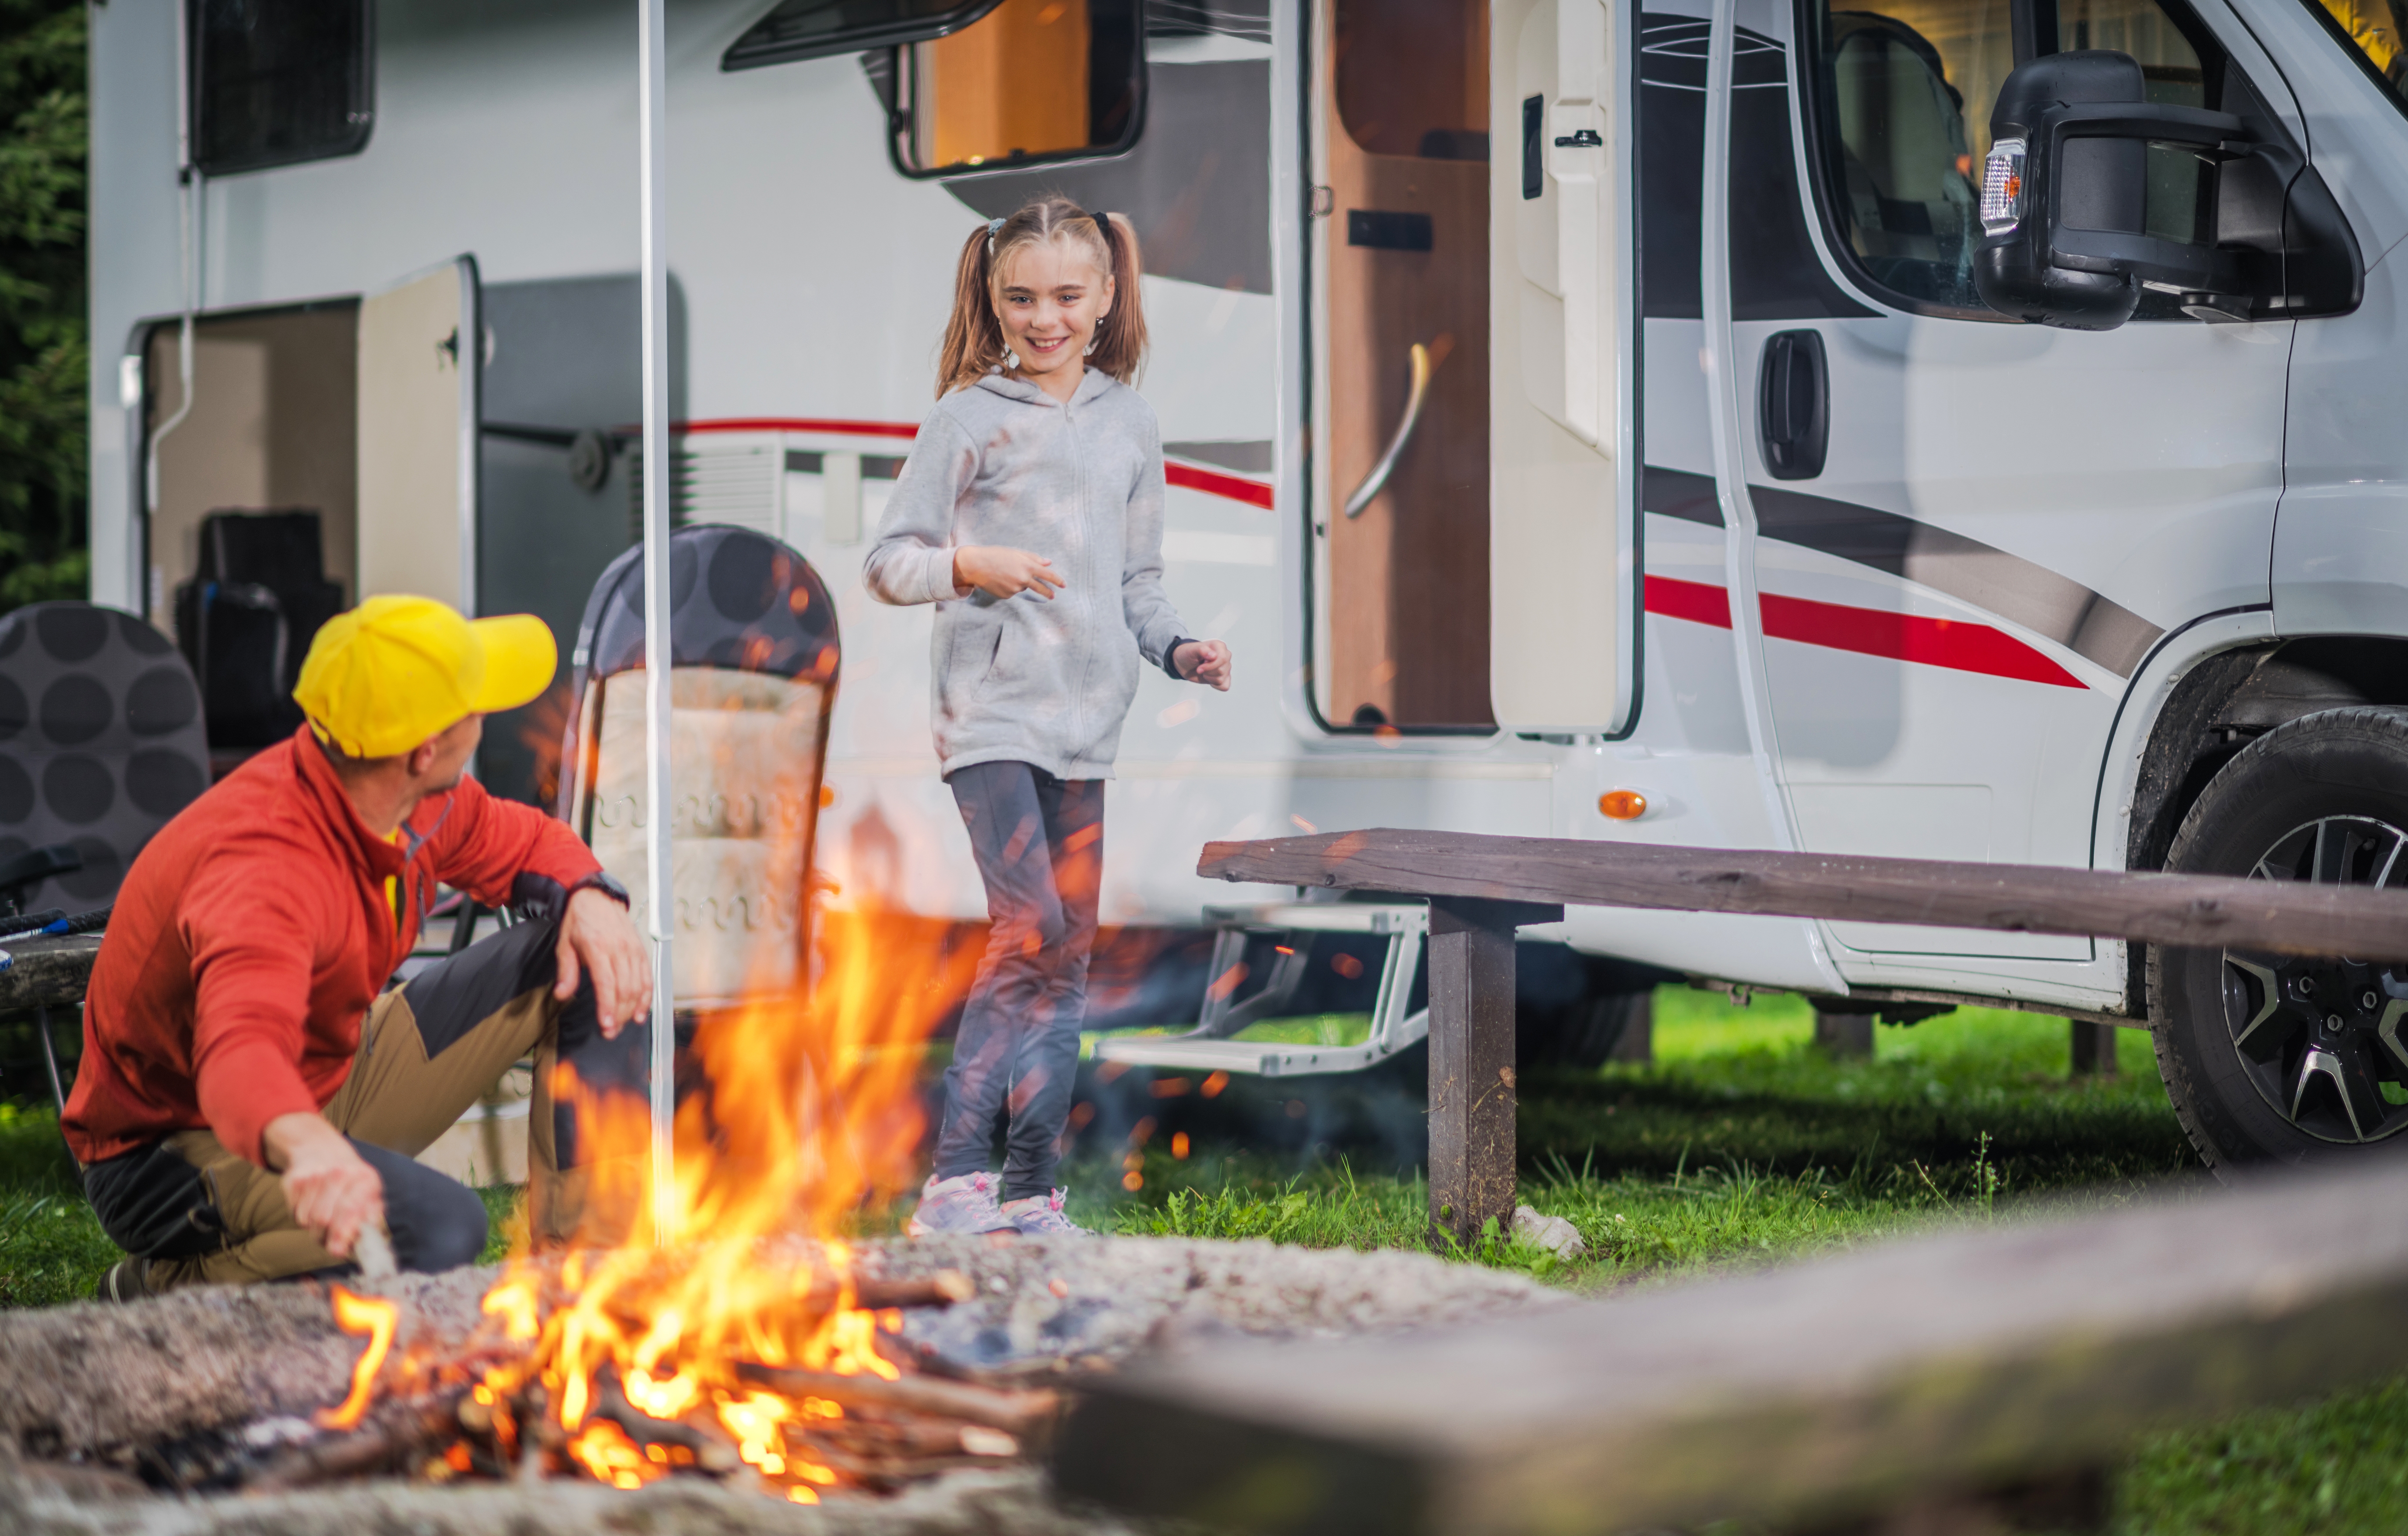 5 Benefits of Full Service RV Parks